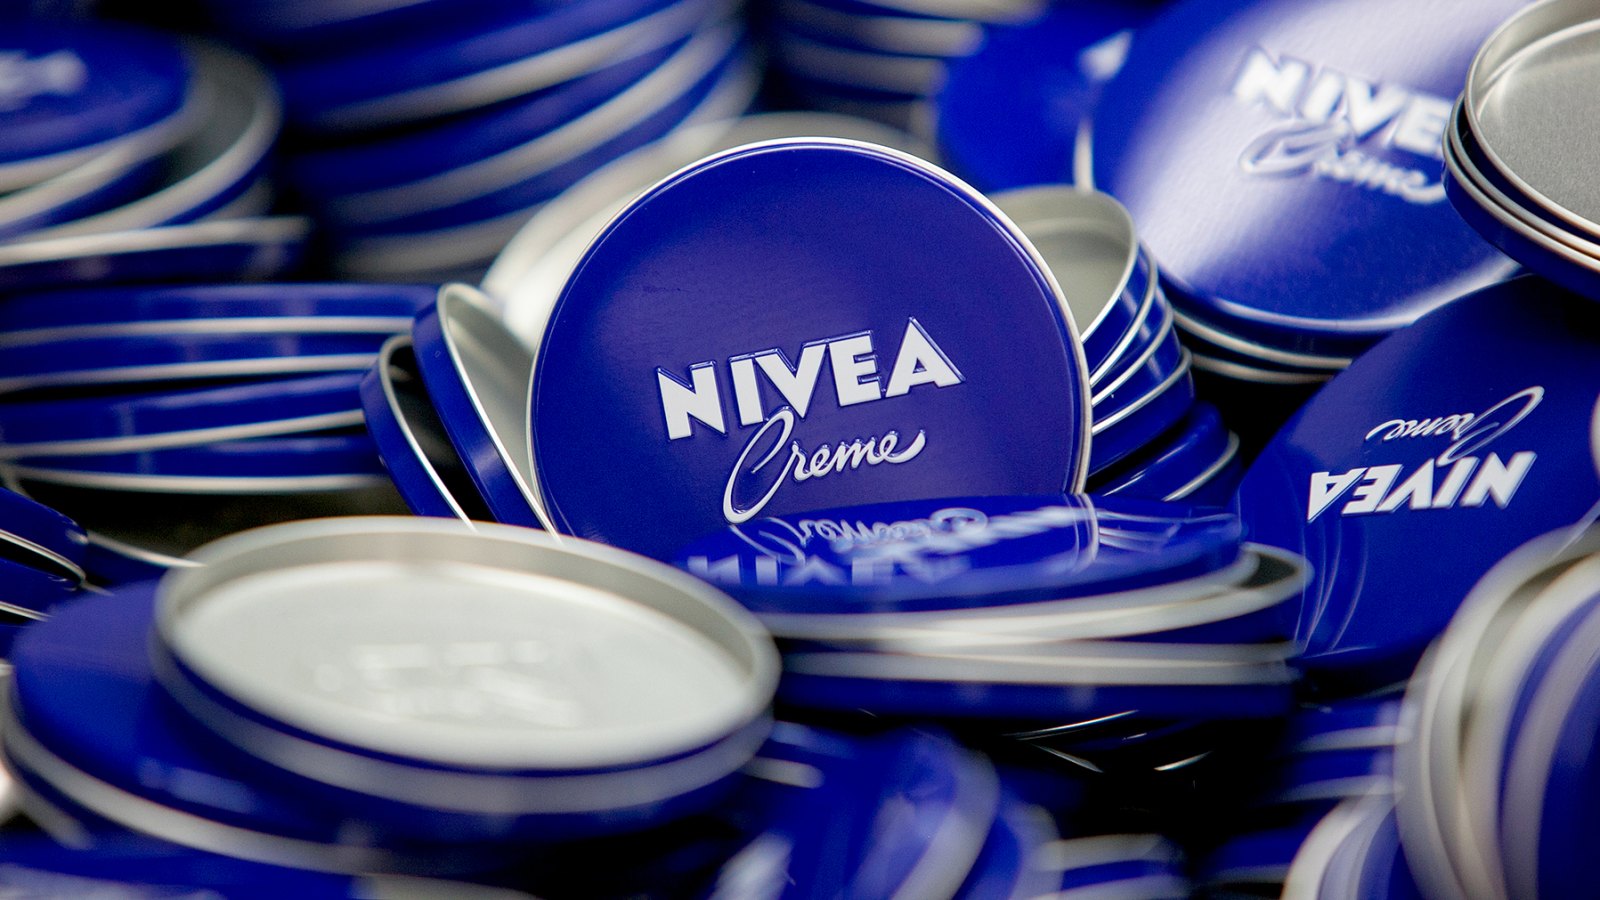 Lids of Nivea Creme skin care lotion tins sit in the production center at the headquarters of Beiersdorf AG in Hamburg, Germany, on Thursday, Feb. 12, 2015.